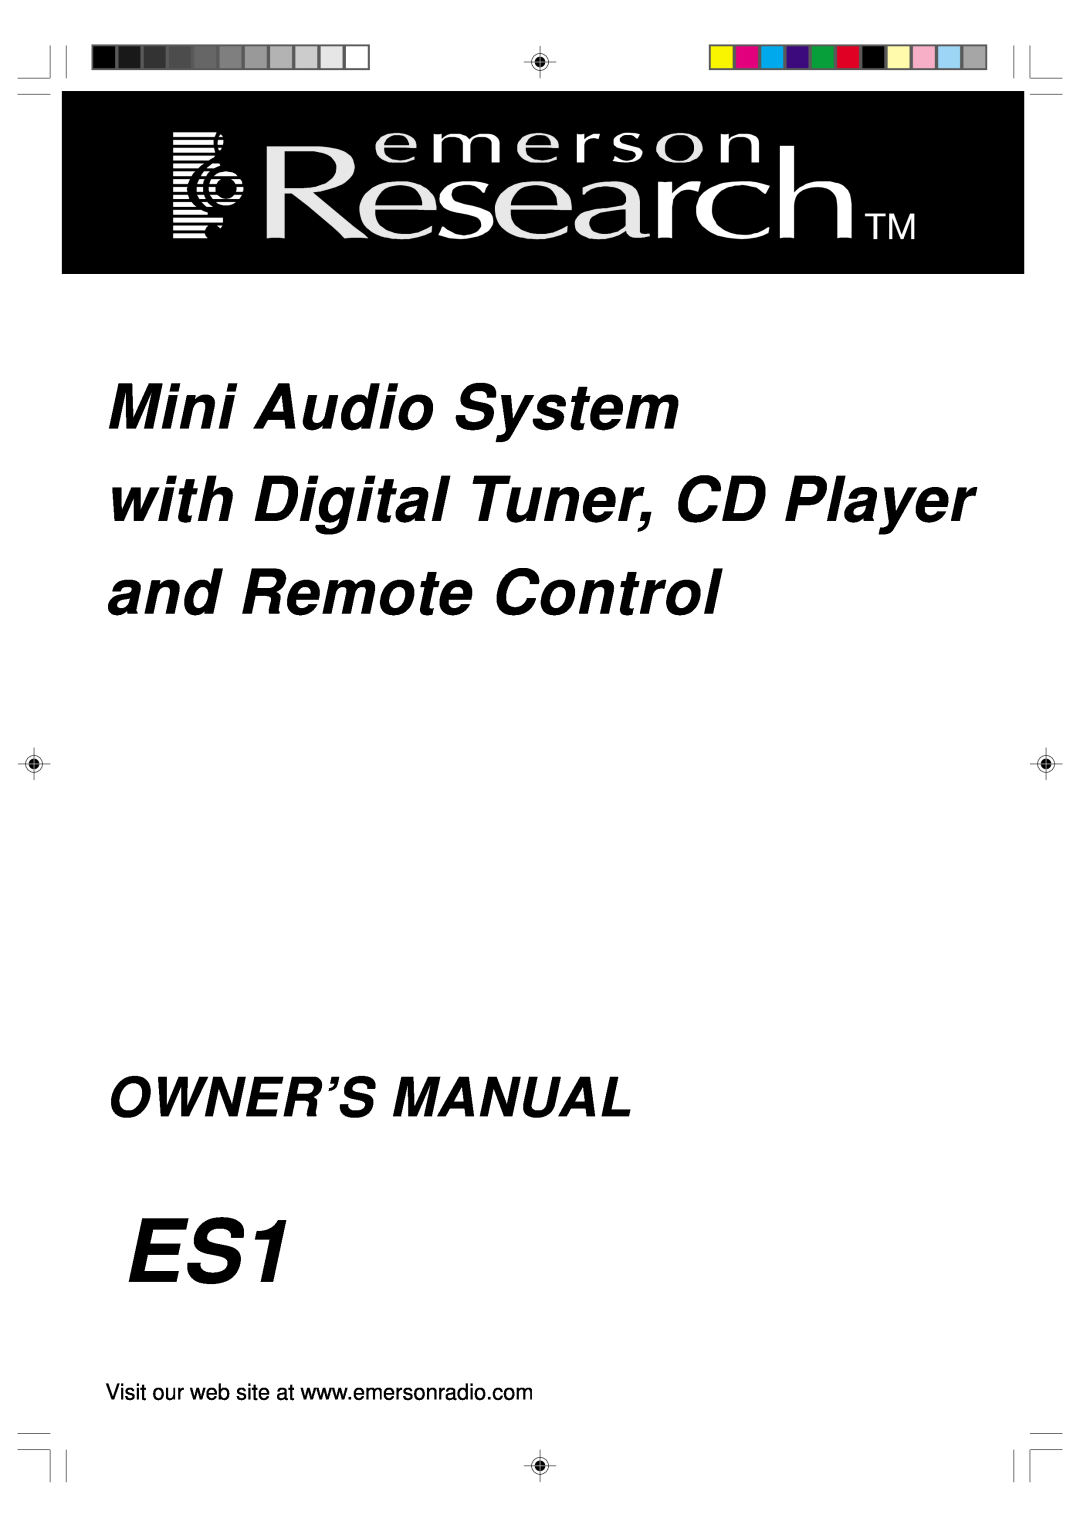 Emerson ES1 owner manual Mini Audio System, with Digital Tuner, CD Player and Remote Control 